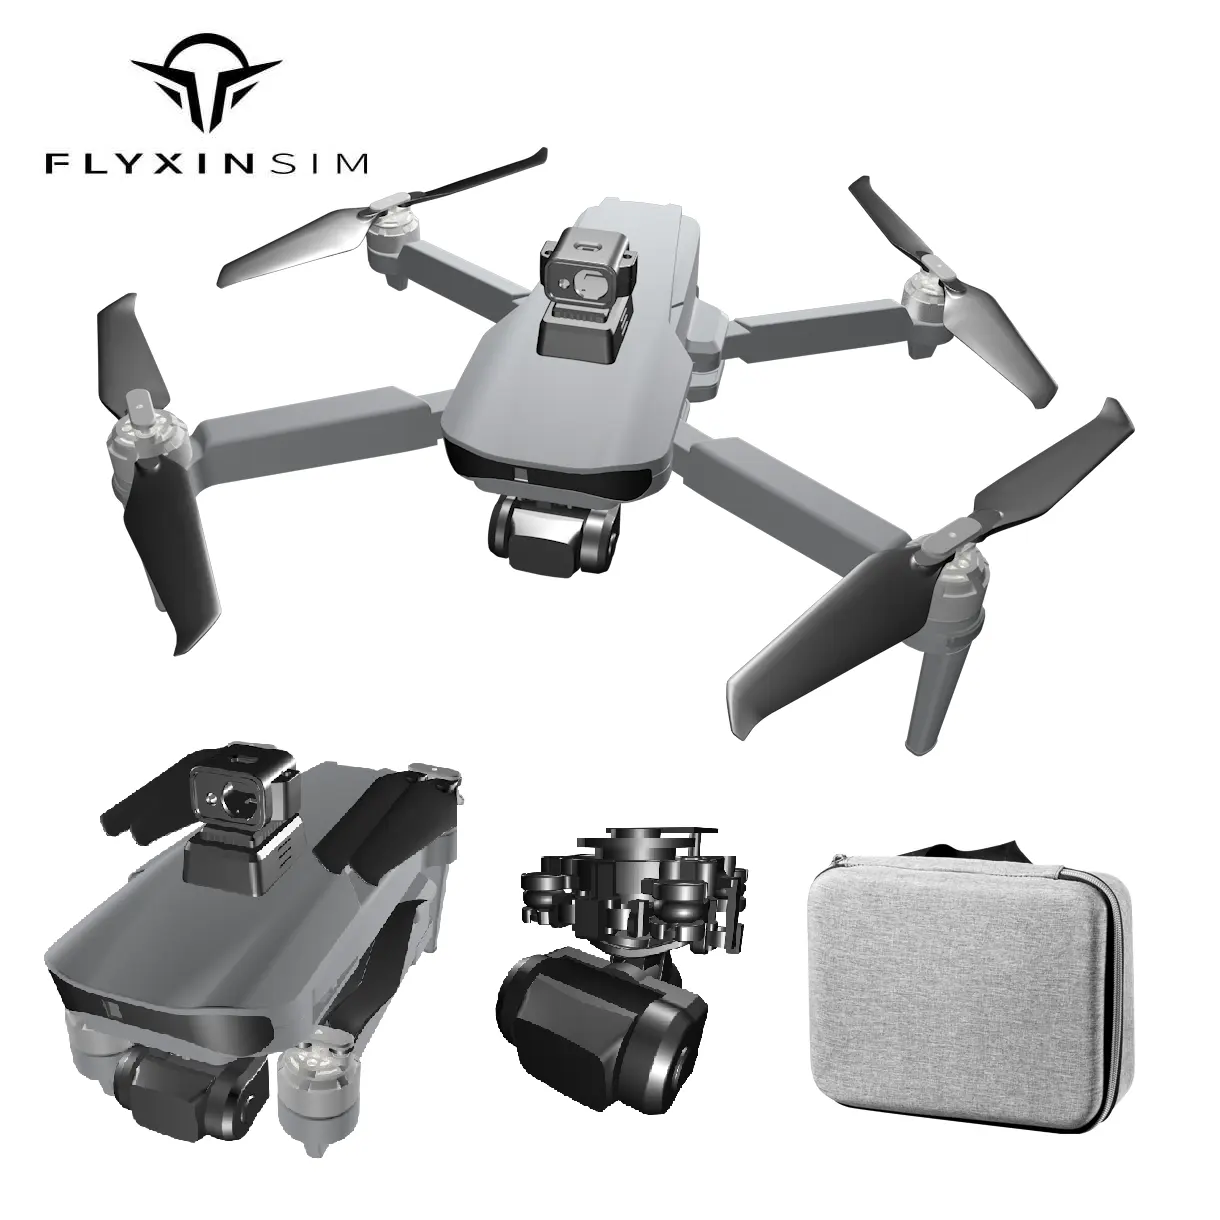 FLYXINSIM KSYOEM Newest Drohne KSY006 MAX 35Mins Obstacles Avoidanc 4K 8K 3 Axis Gimbal EIS Repeater Brushless drones con camara